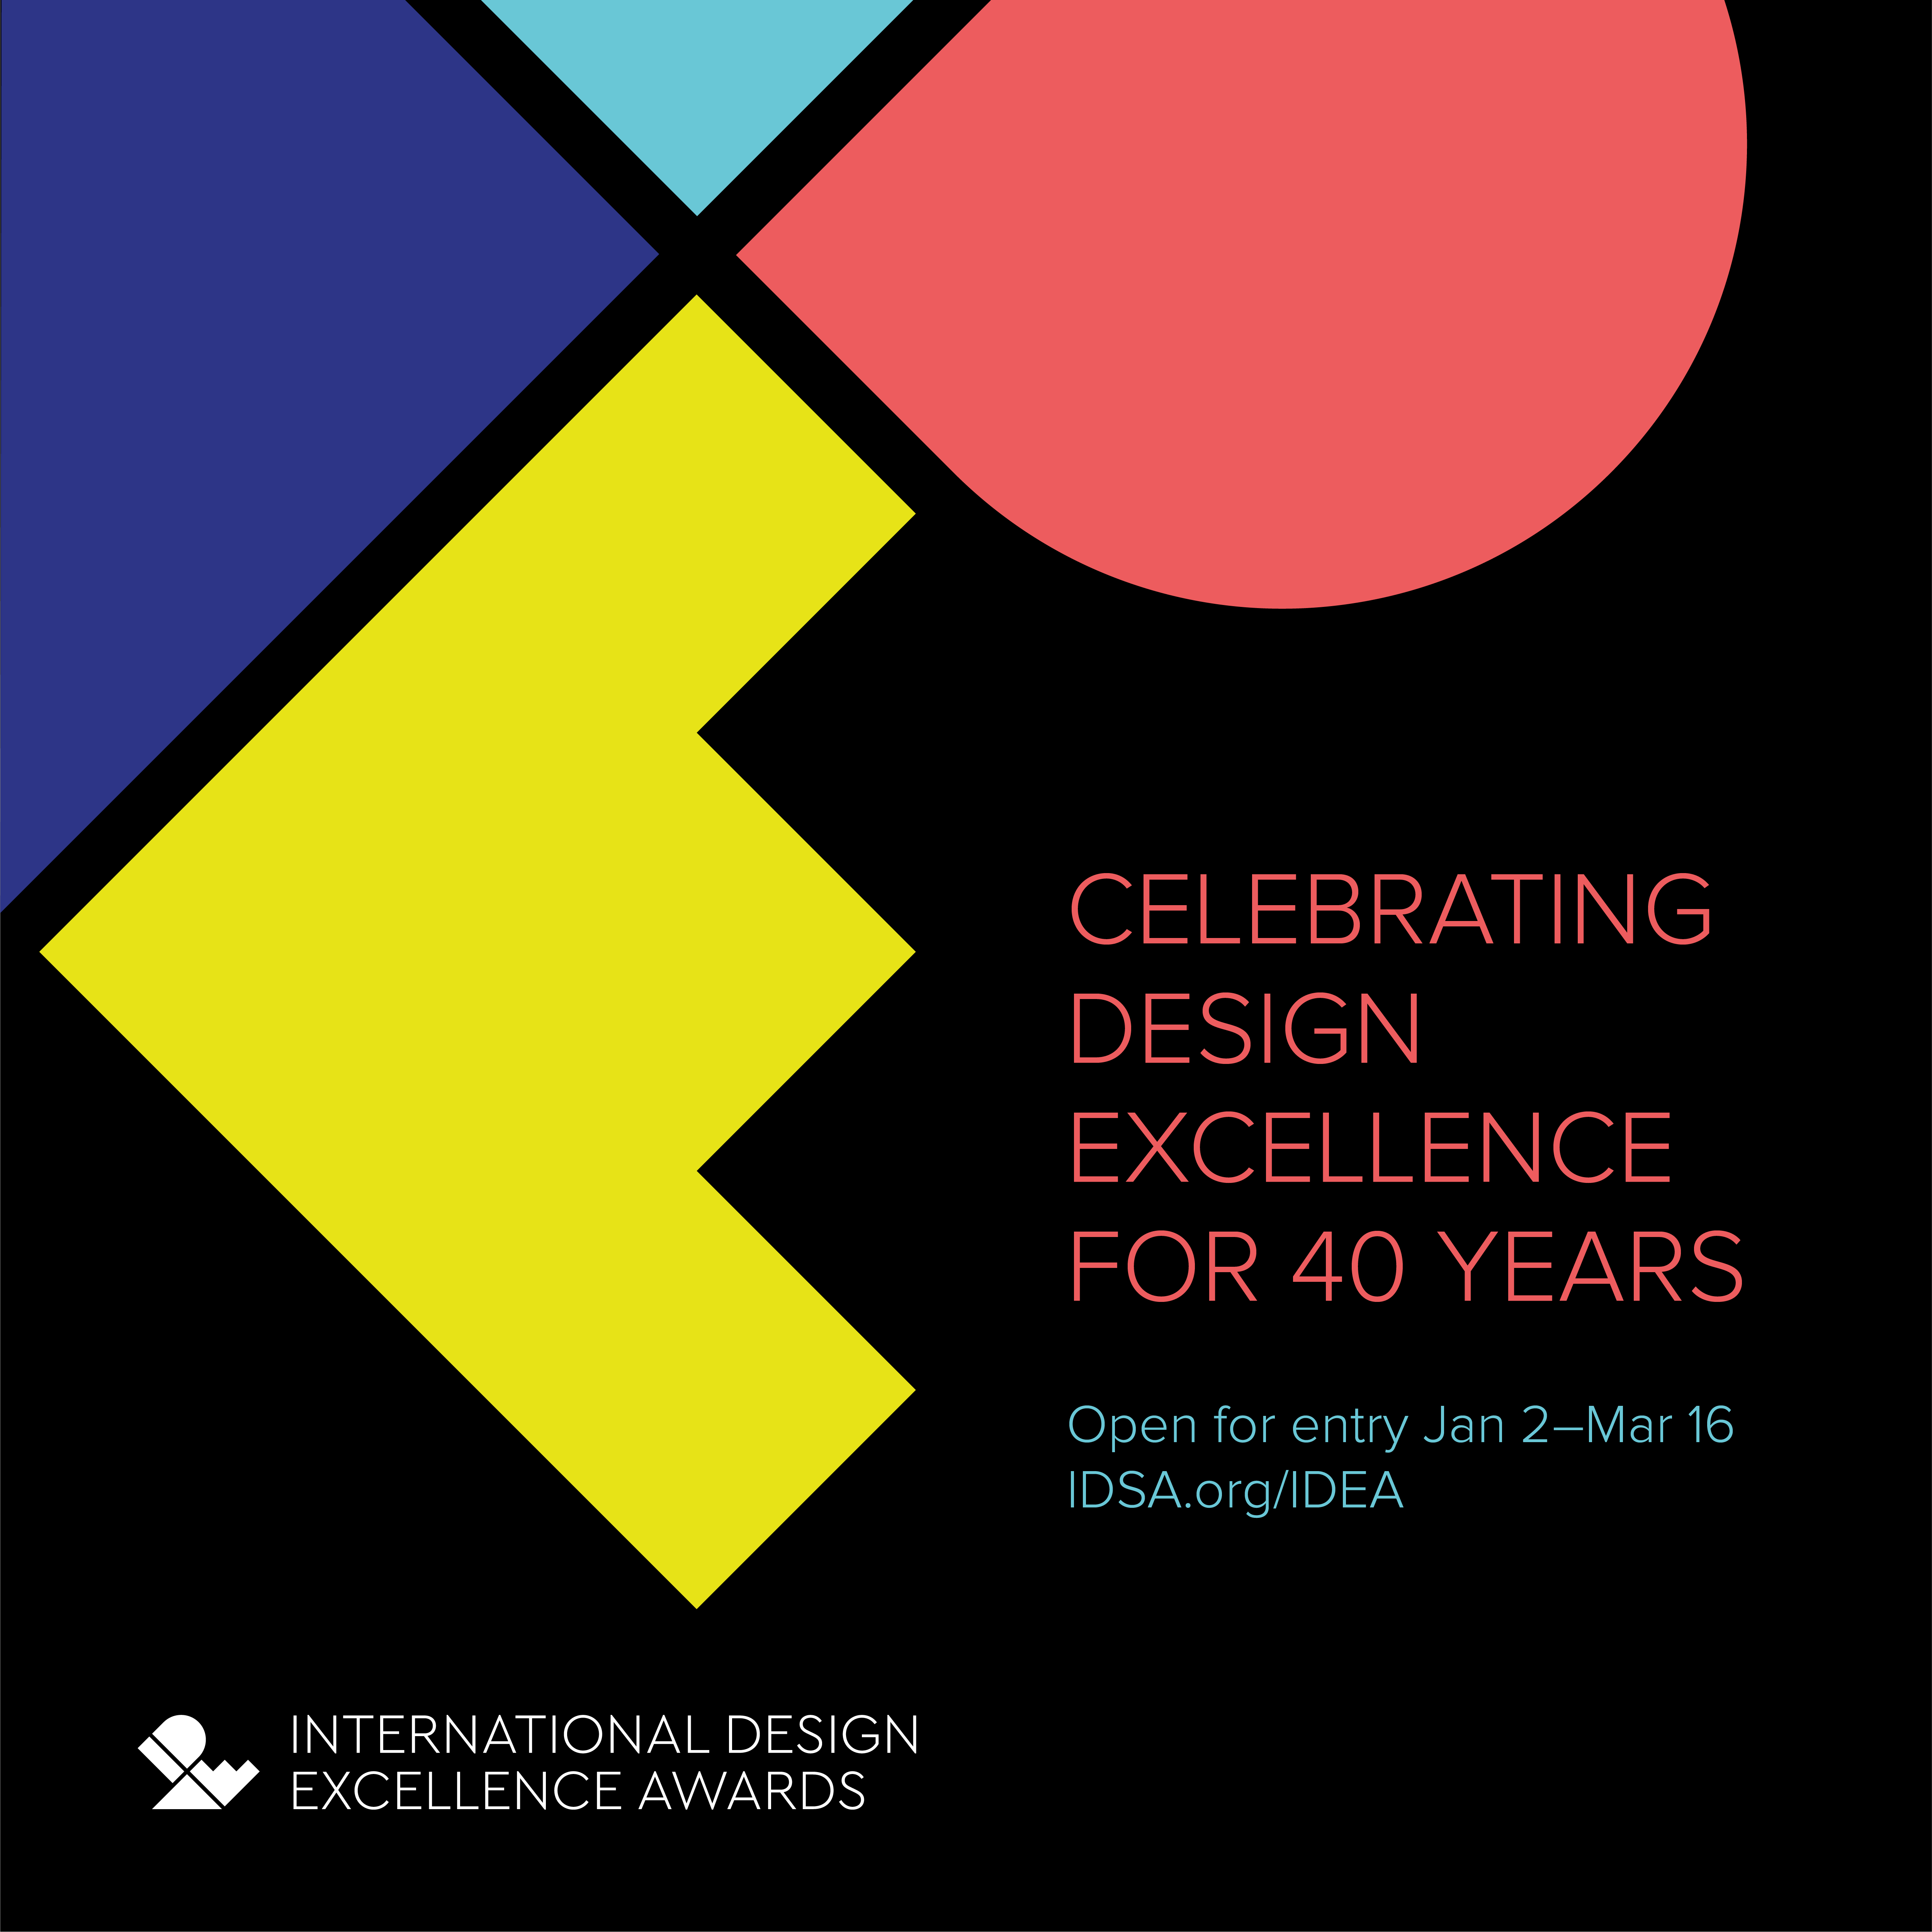 Submit to one of the world's most prestigious design competitions.